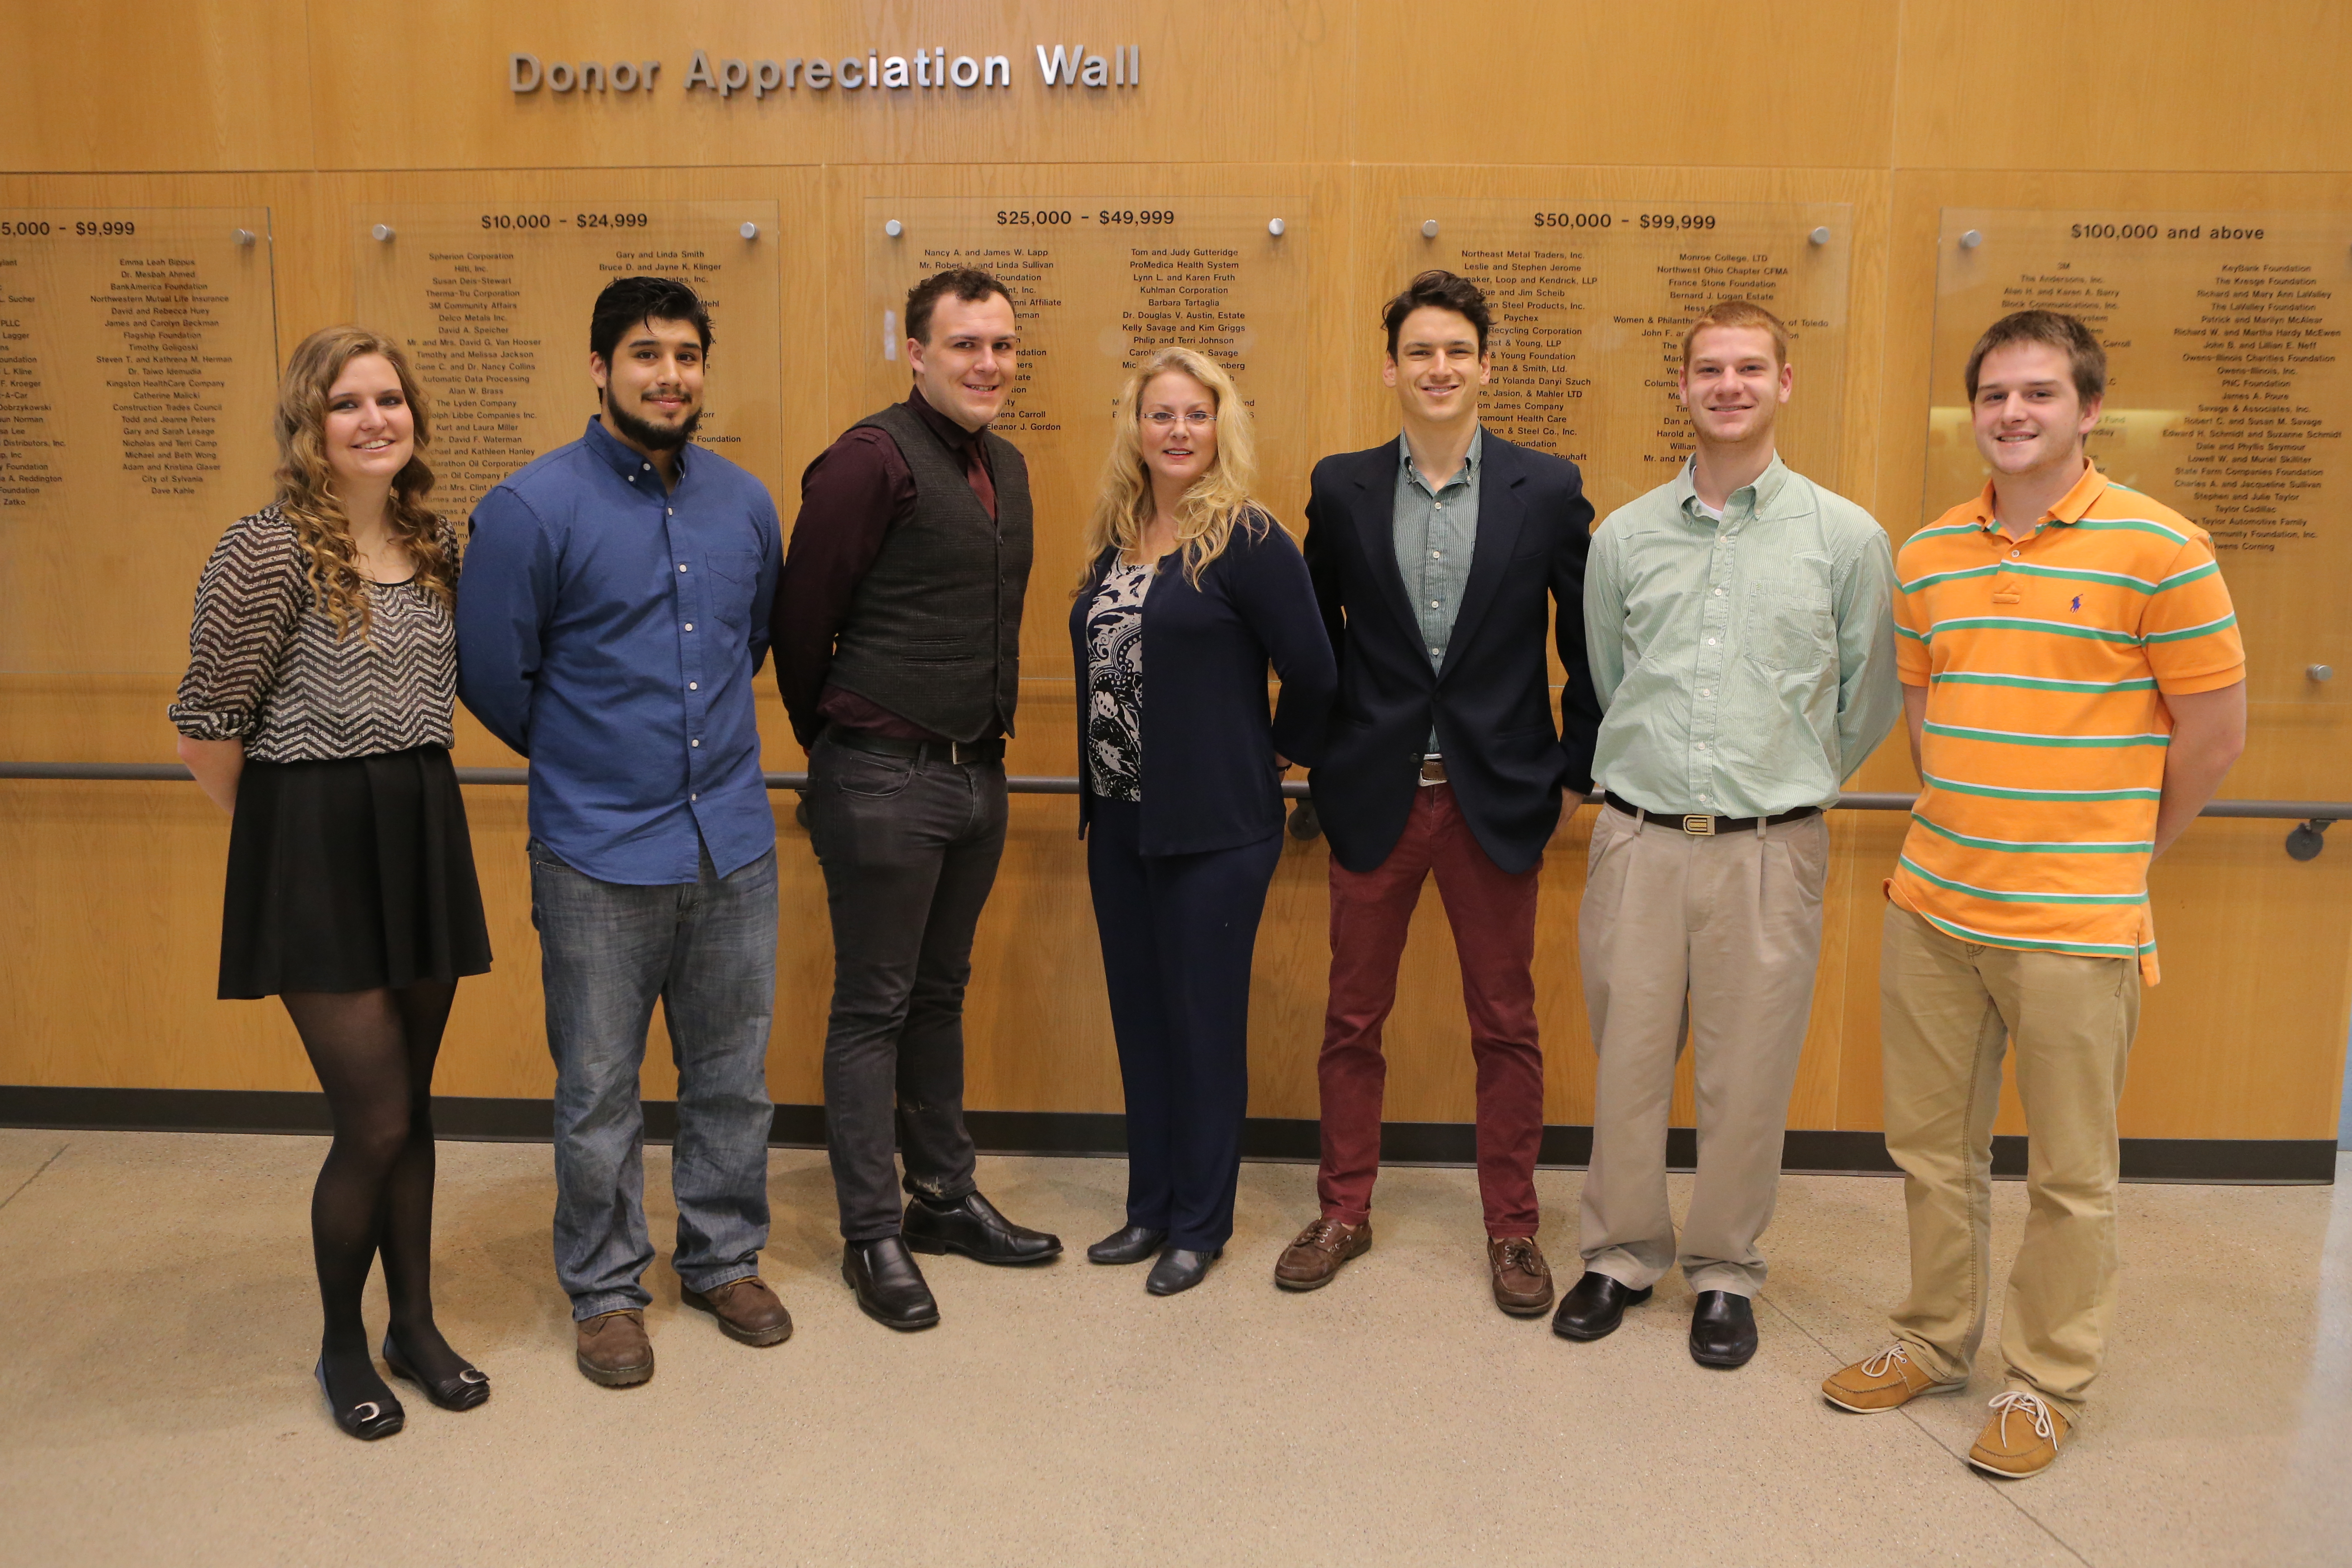 Professor Laura Williams, center, and some students already involved with the Free Tax Preparation Program, left to right, Marissa Gibbons, Max Sanchez, Austin Morrin, Evan Madden, Parker Wall and Derek Martindale.